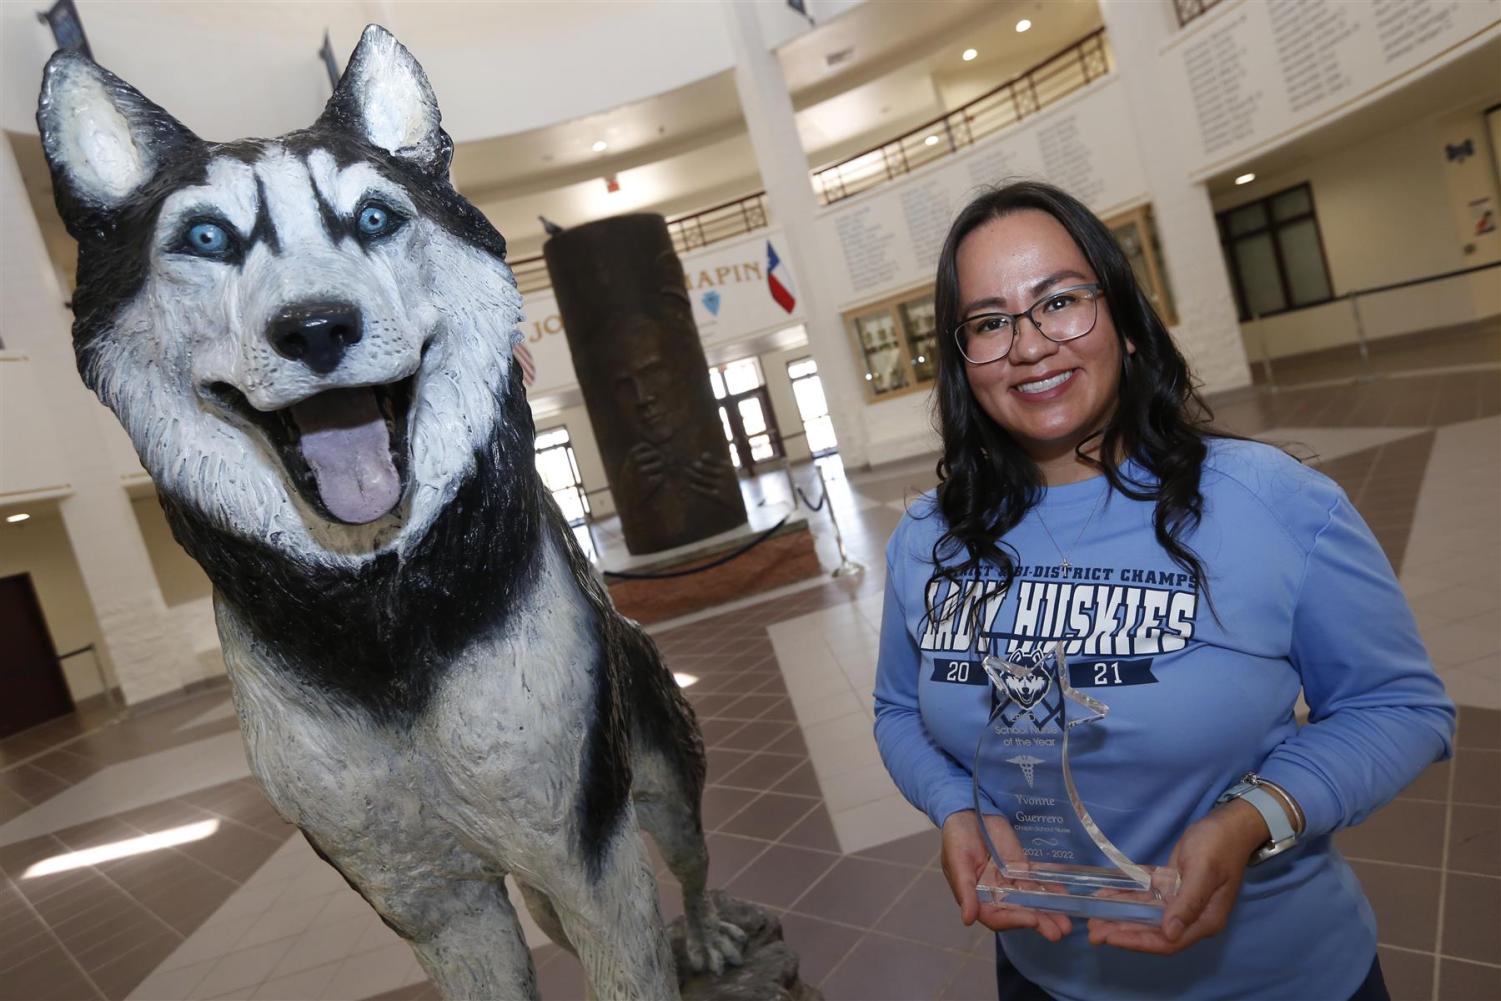 Nurse Guerrero poses with her district award representing the Huskies.